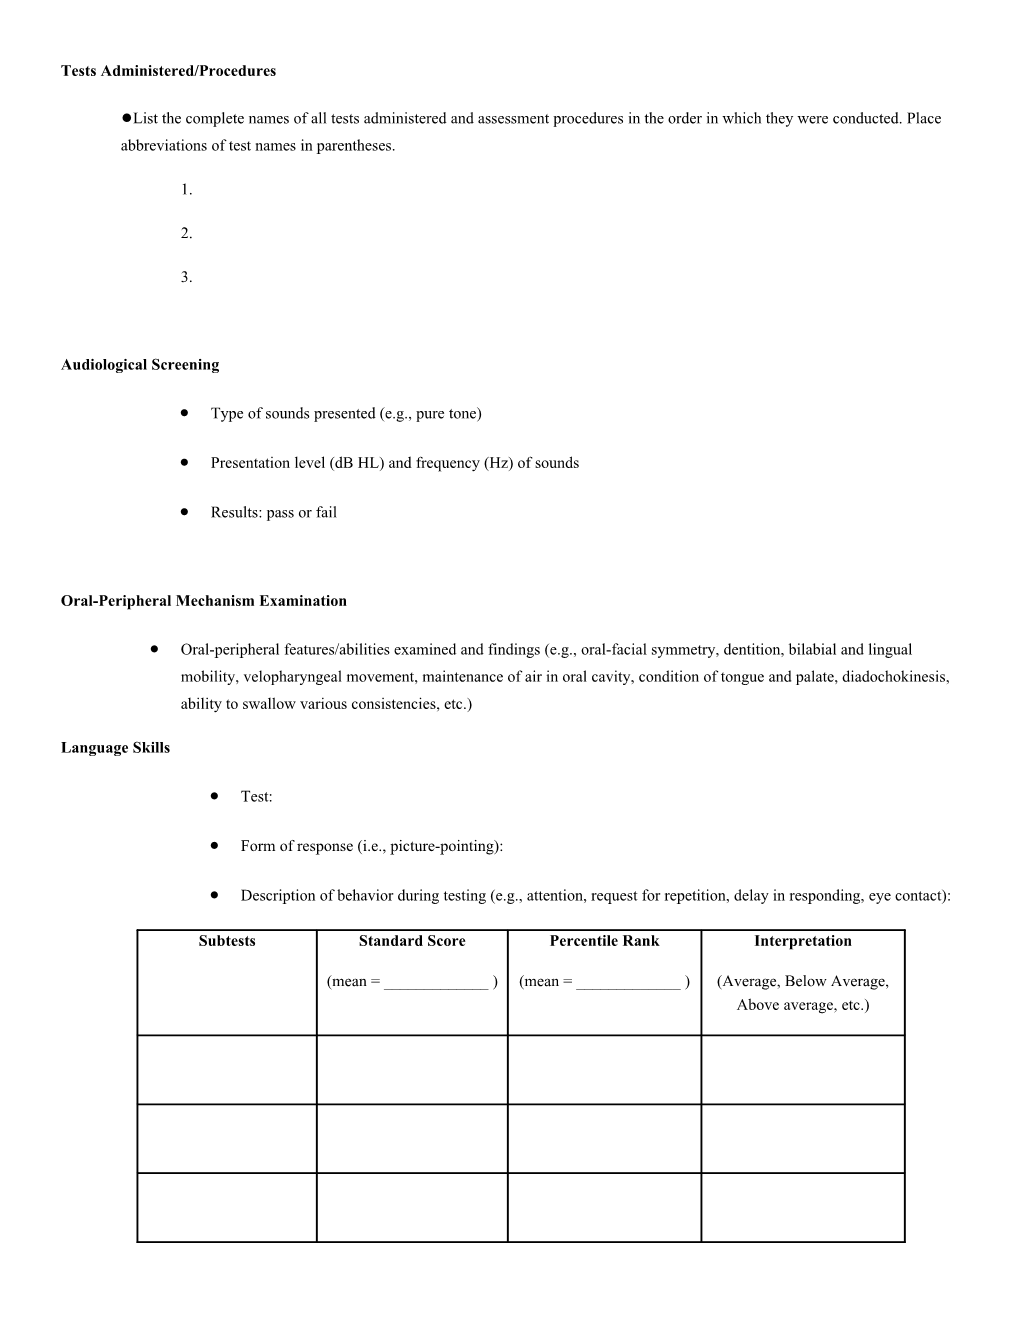 Outpatient Hospital Pediatric Diagnostic Note Taking Guide